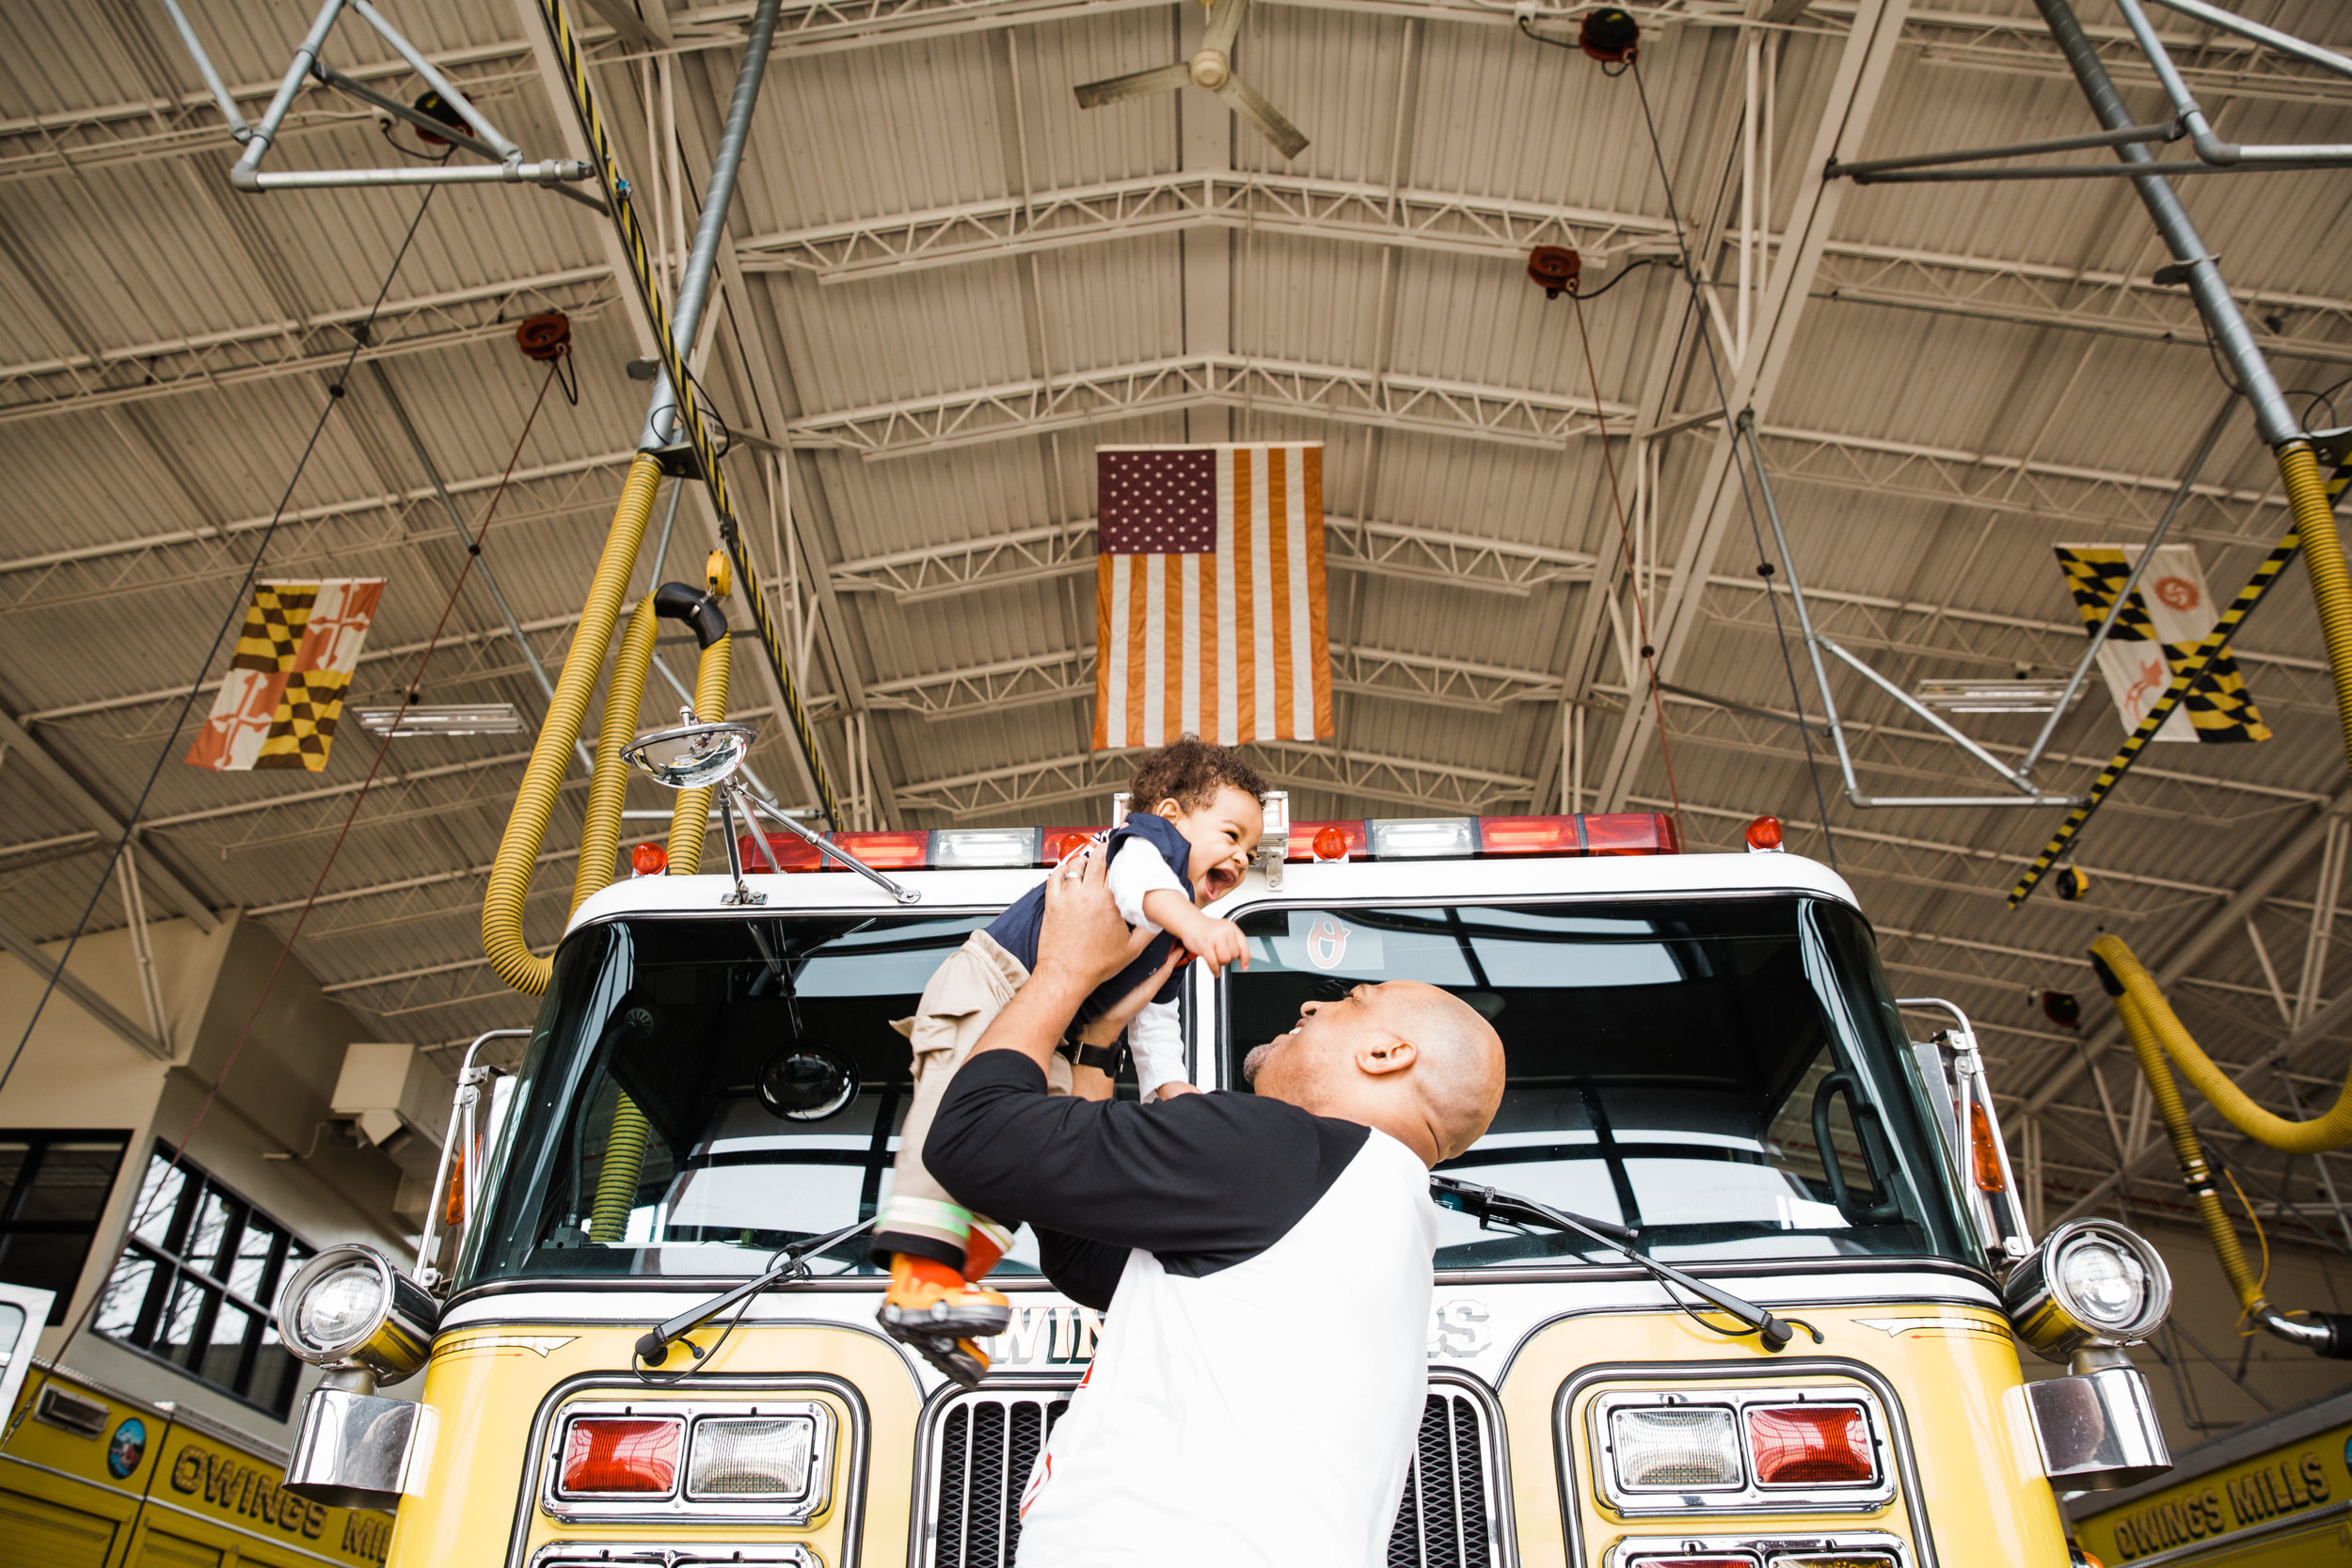 Fireman Birthday Party Ideas  Decorations Owings Mills Fire Department Maryland Family Photographers Megapixels Media Photography (28 of 55).jpg